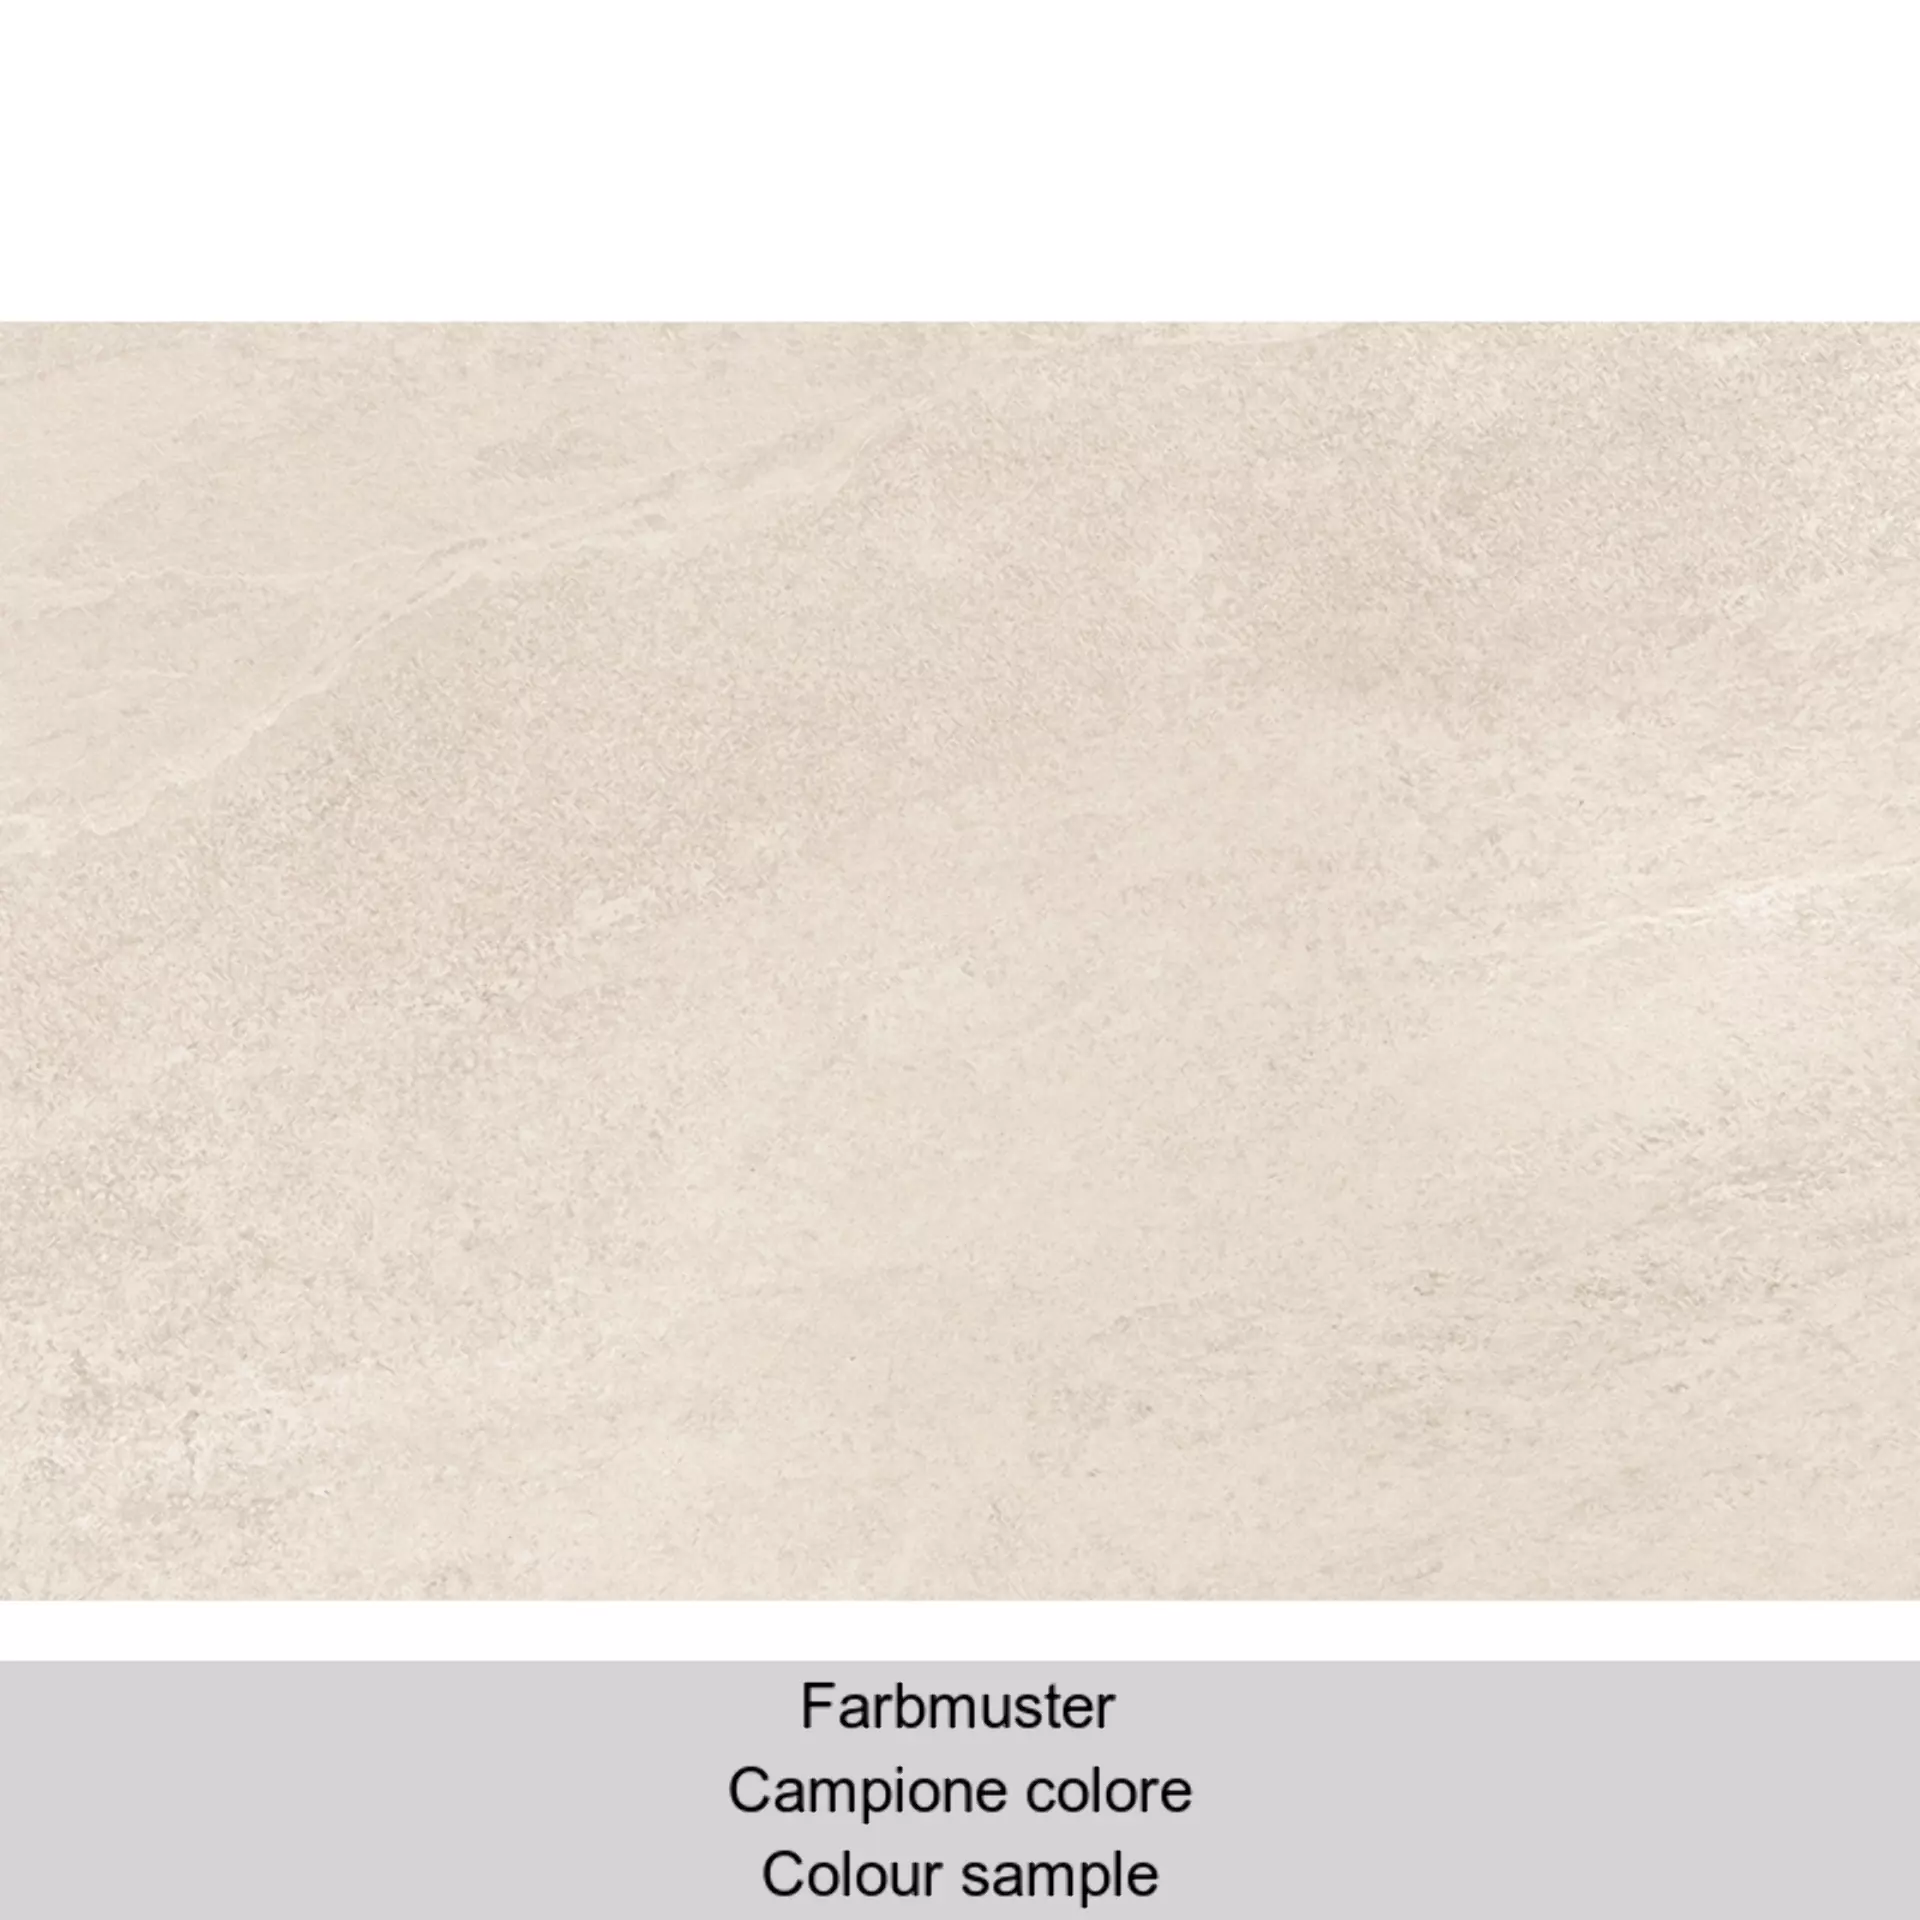 Novabell Norgestone Ivory Outwalk – Naturale Module 3 Formati NSTM833 60x90cm 20mm